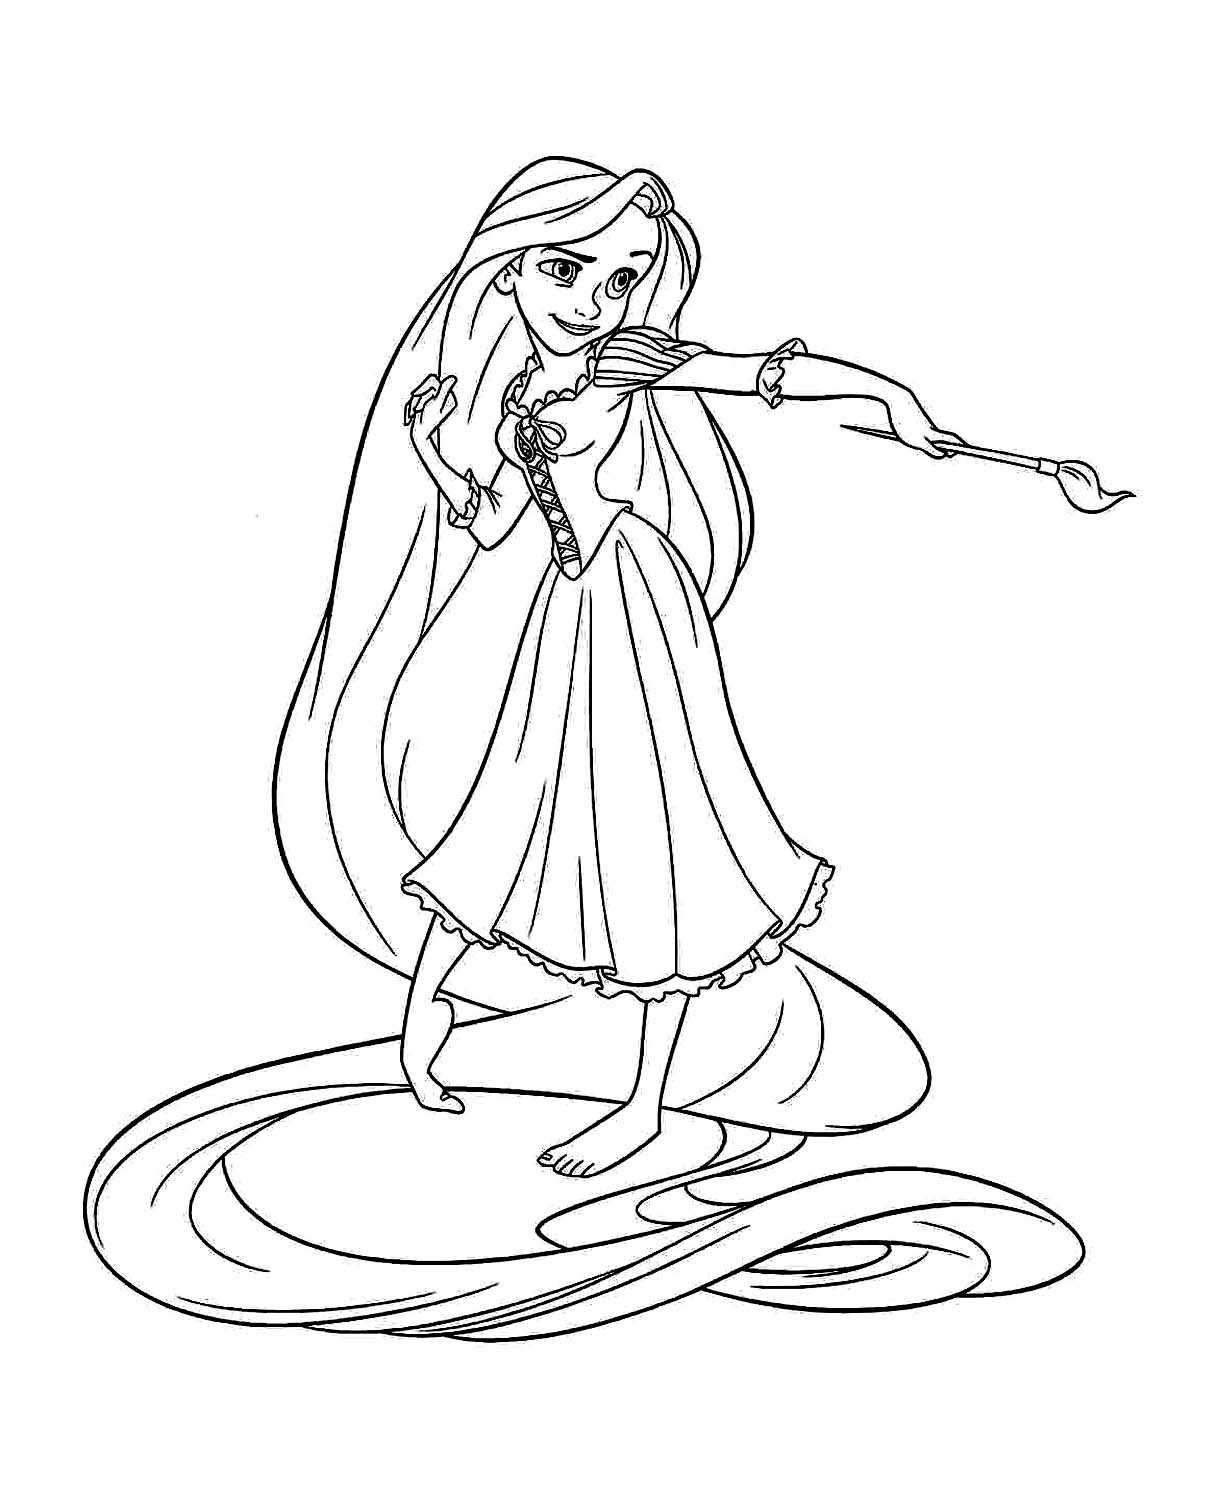 tangled-for-kids-tangled-kids-coloring-pages